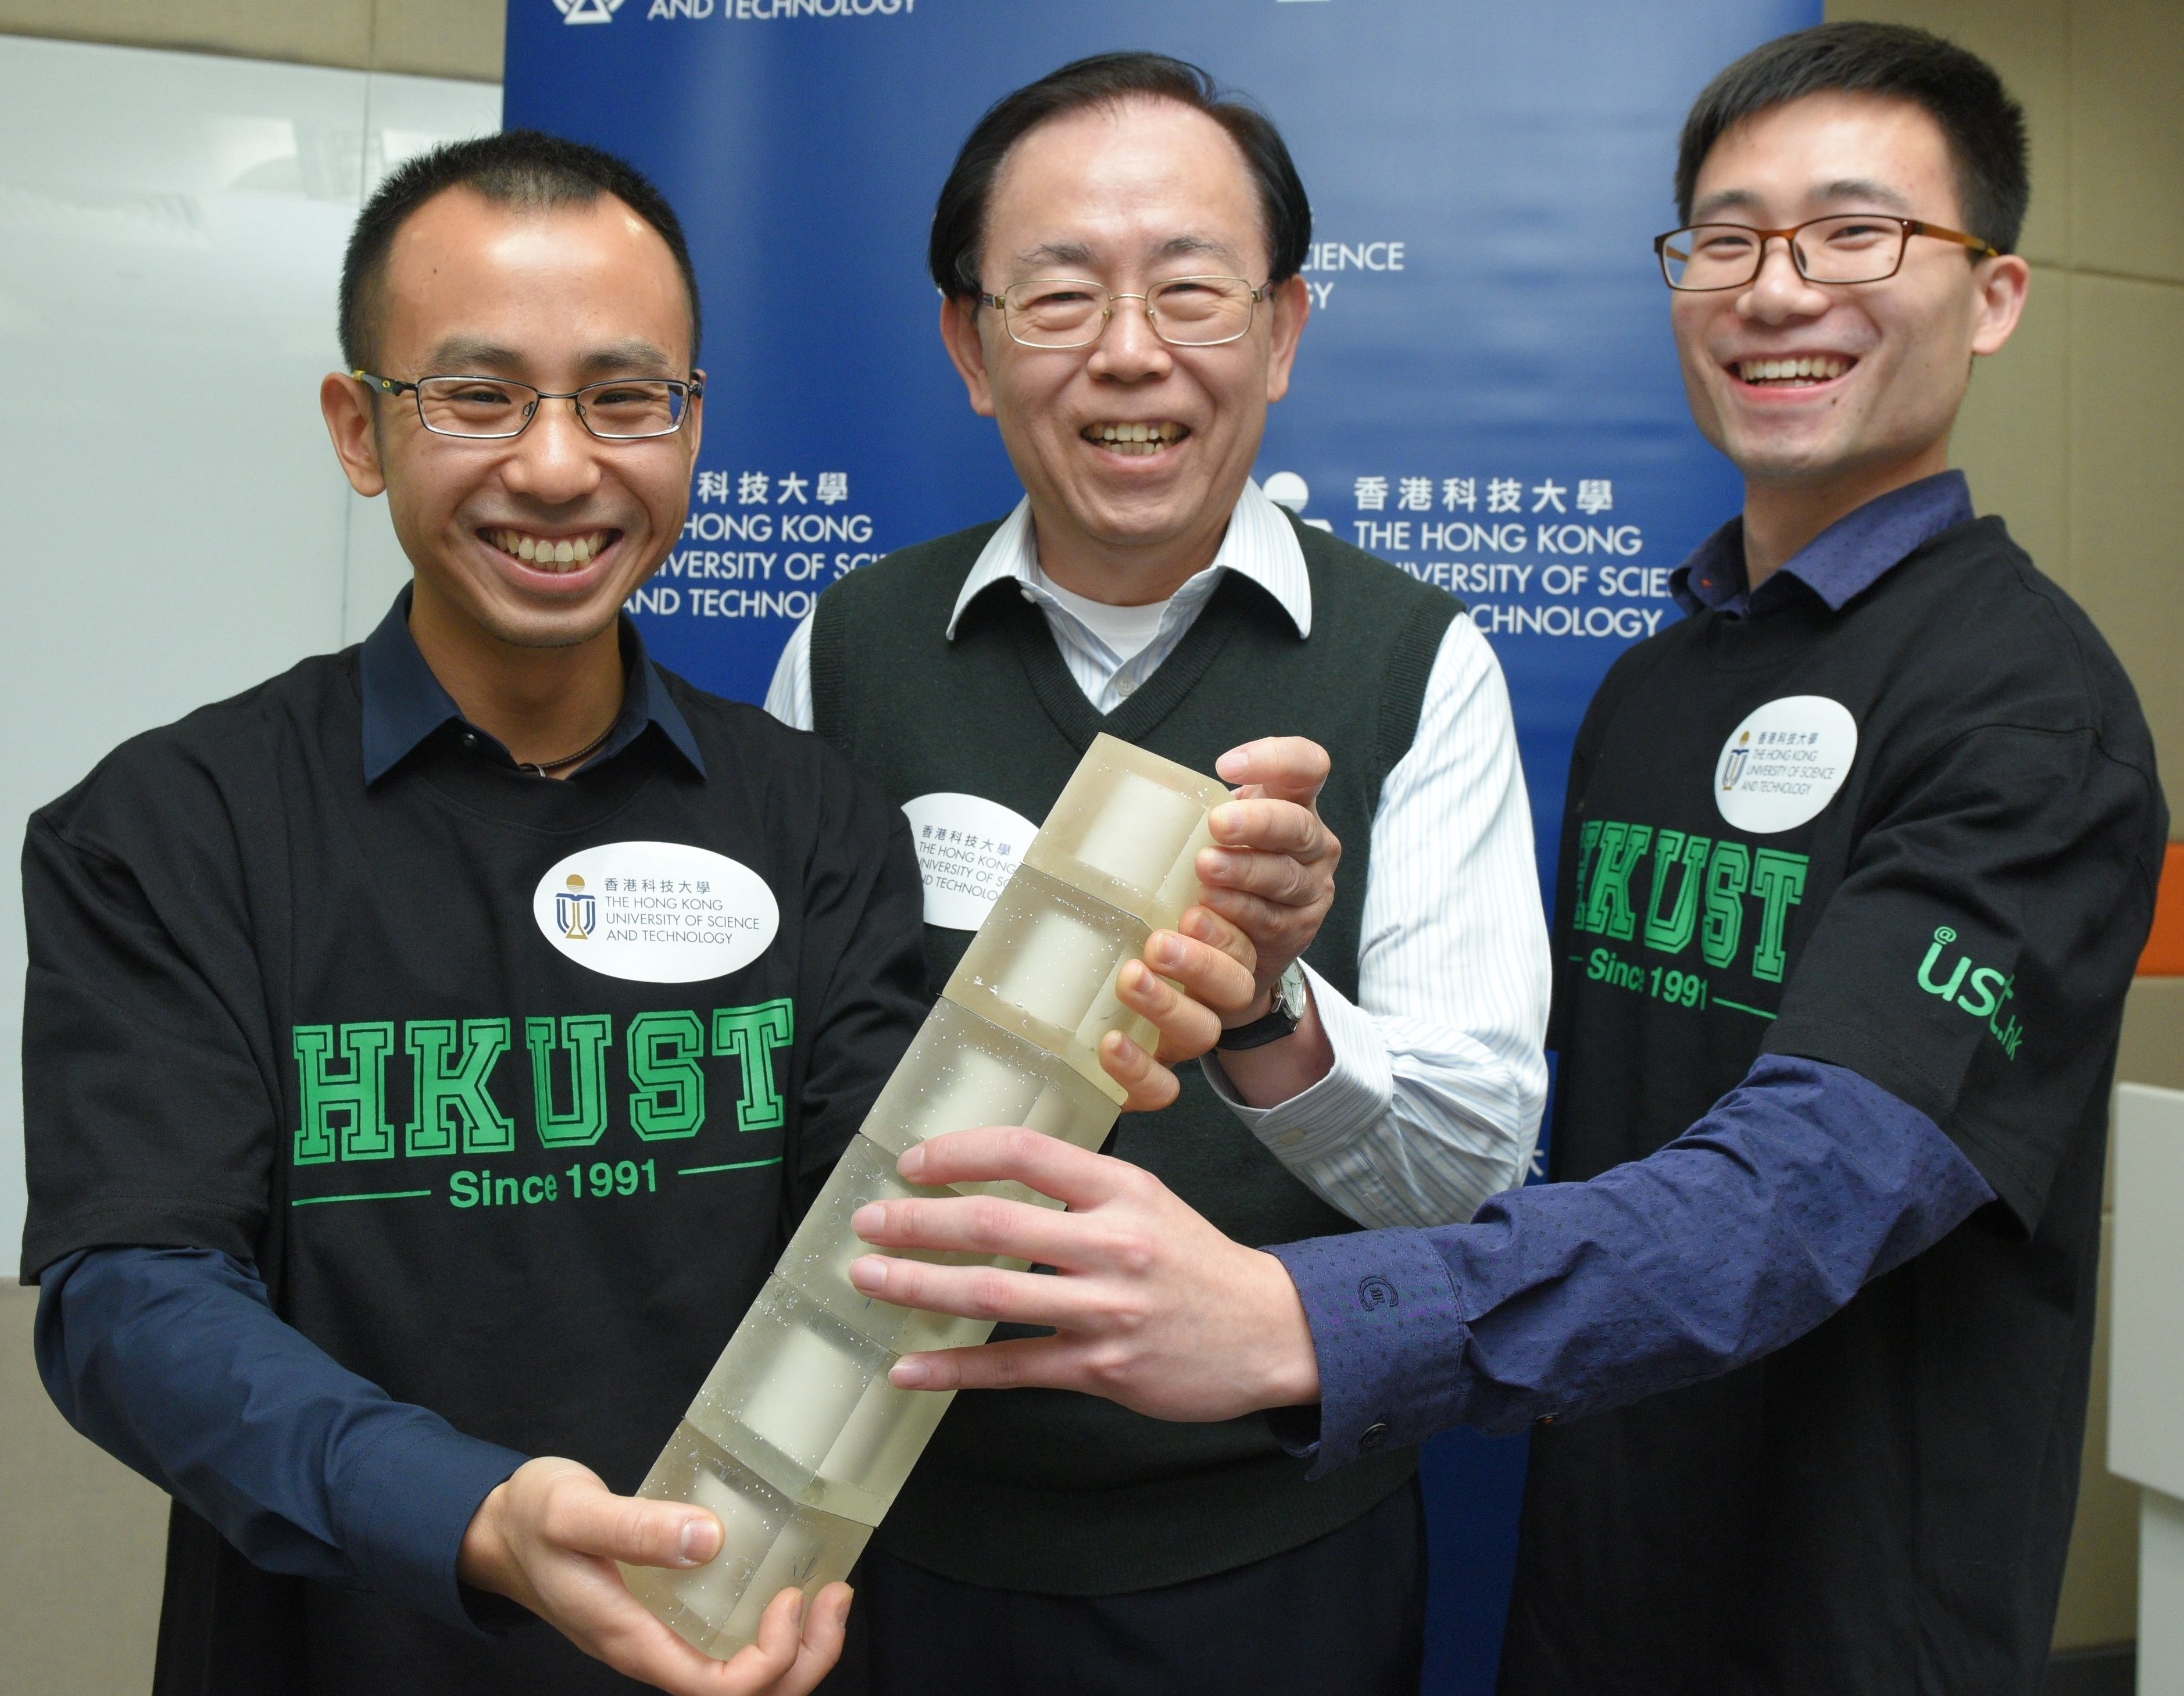 Prof. SHENG Ping(Middle) and his research team members Dr. MA Guancong(Left) and Mr. FU Caixing(Right)